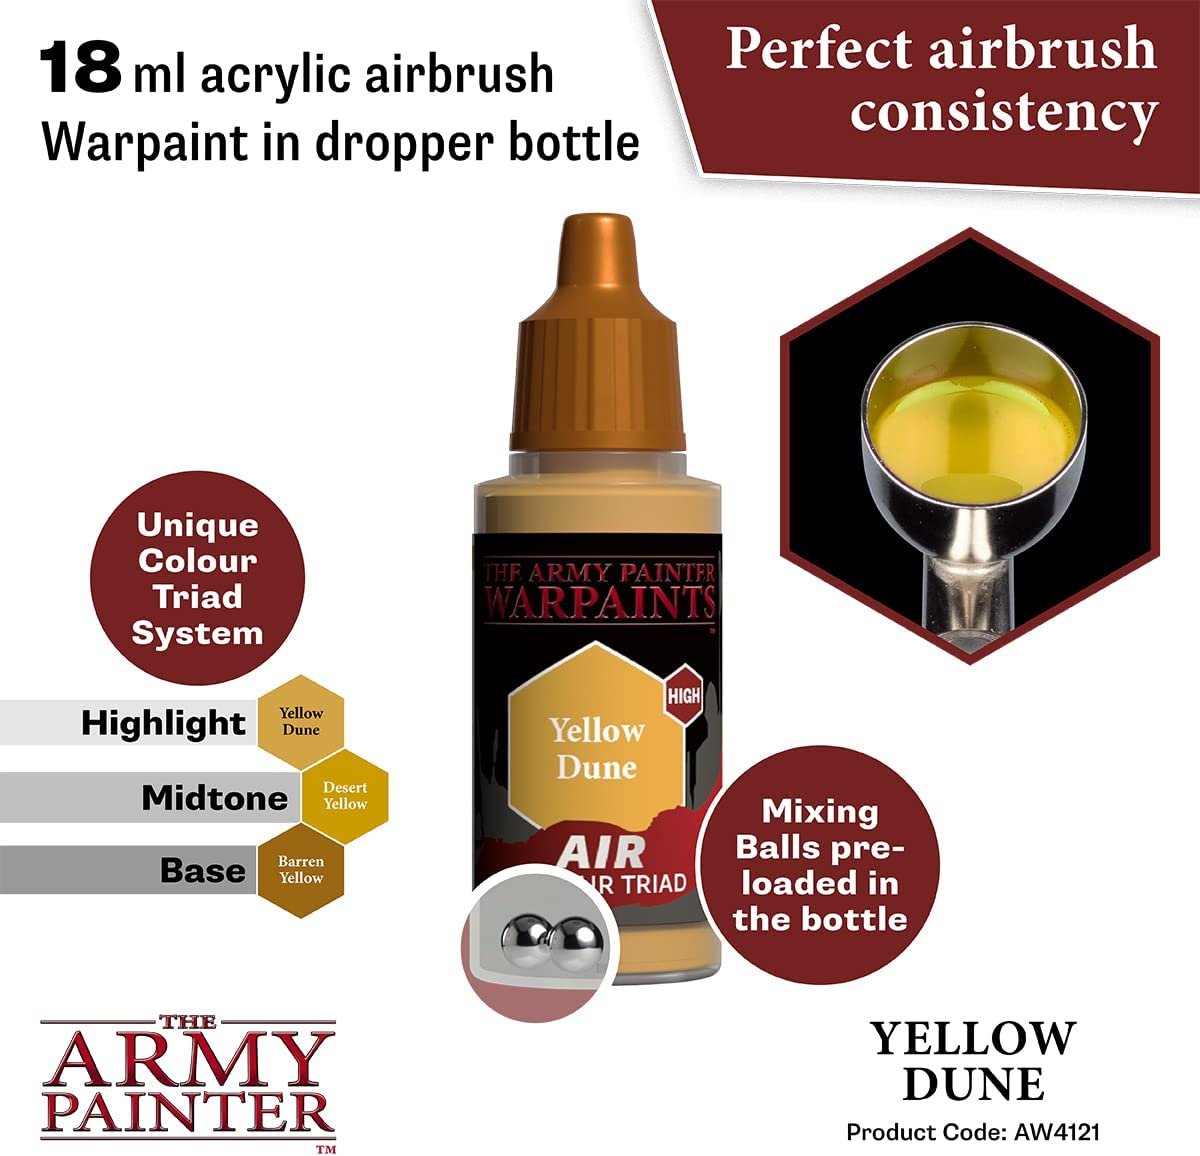 The Army Painter - Warpaints Air: Yellow Dune (18ml/0.6oz)